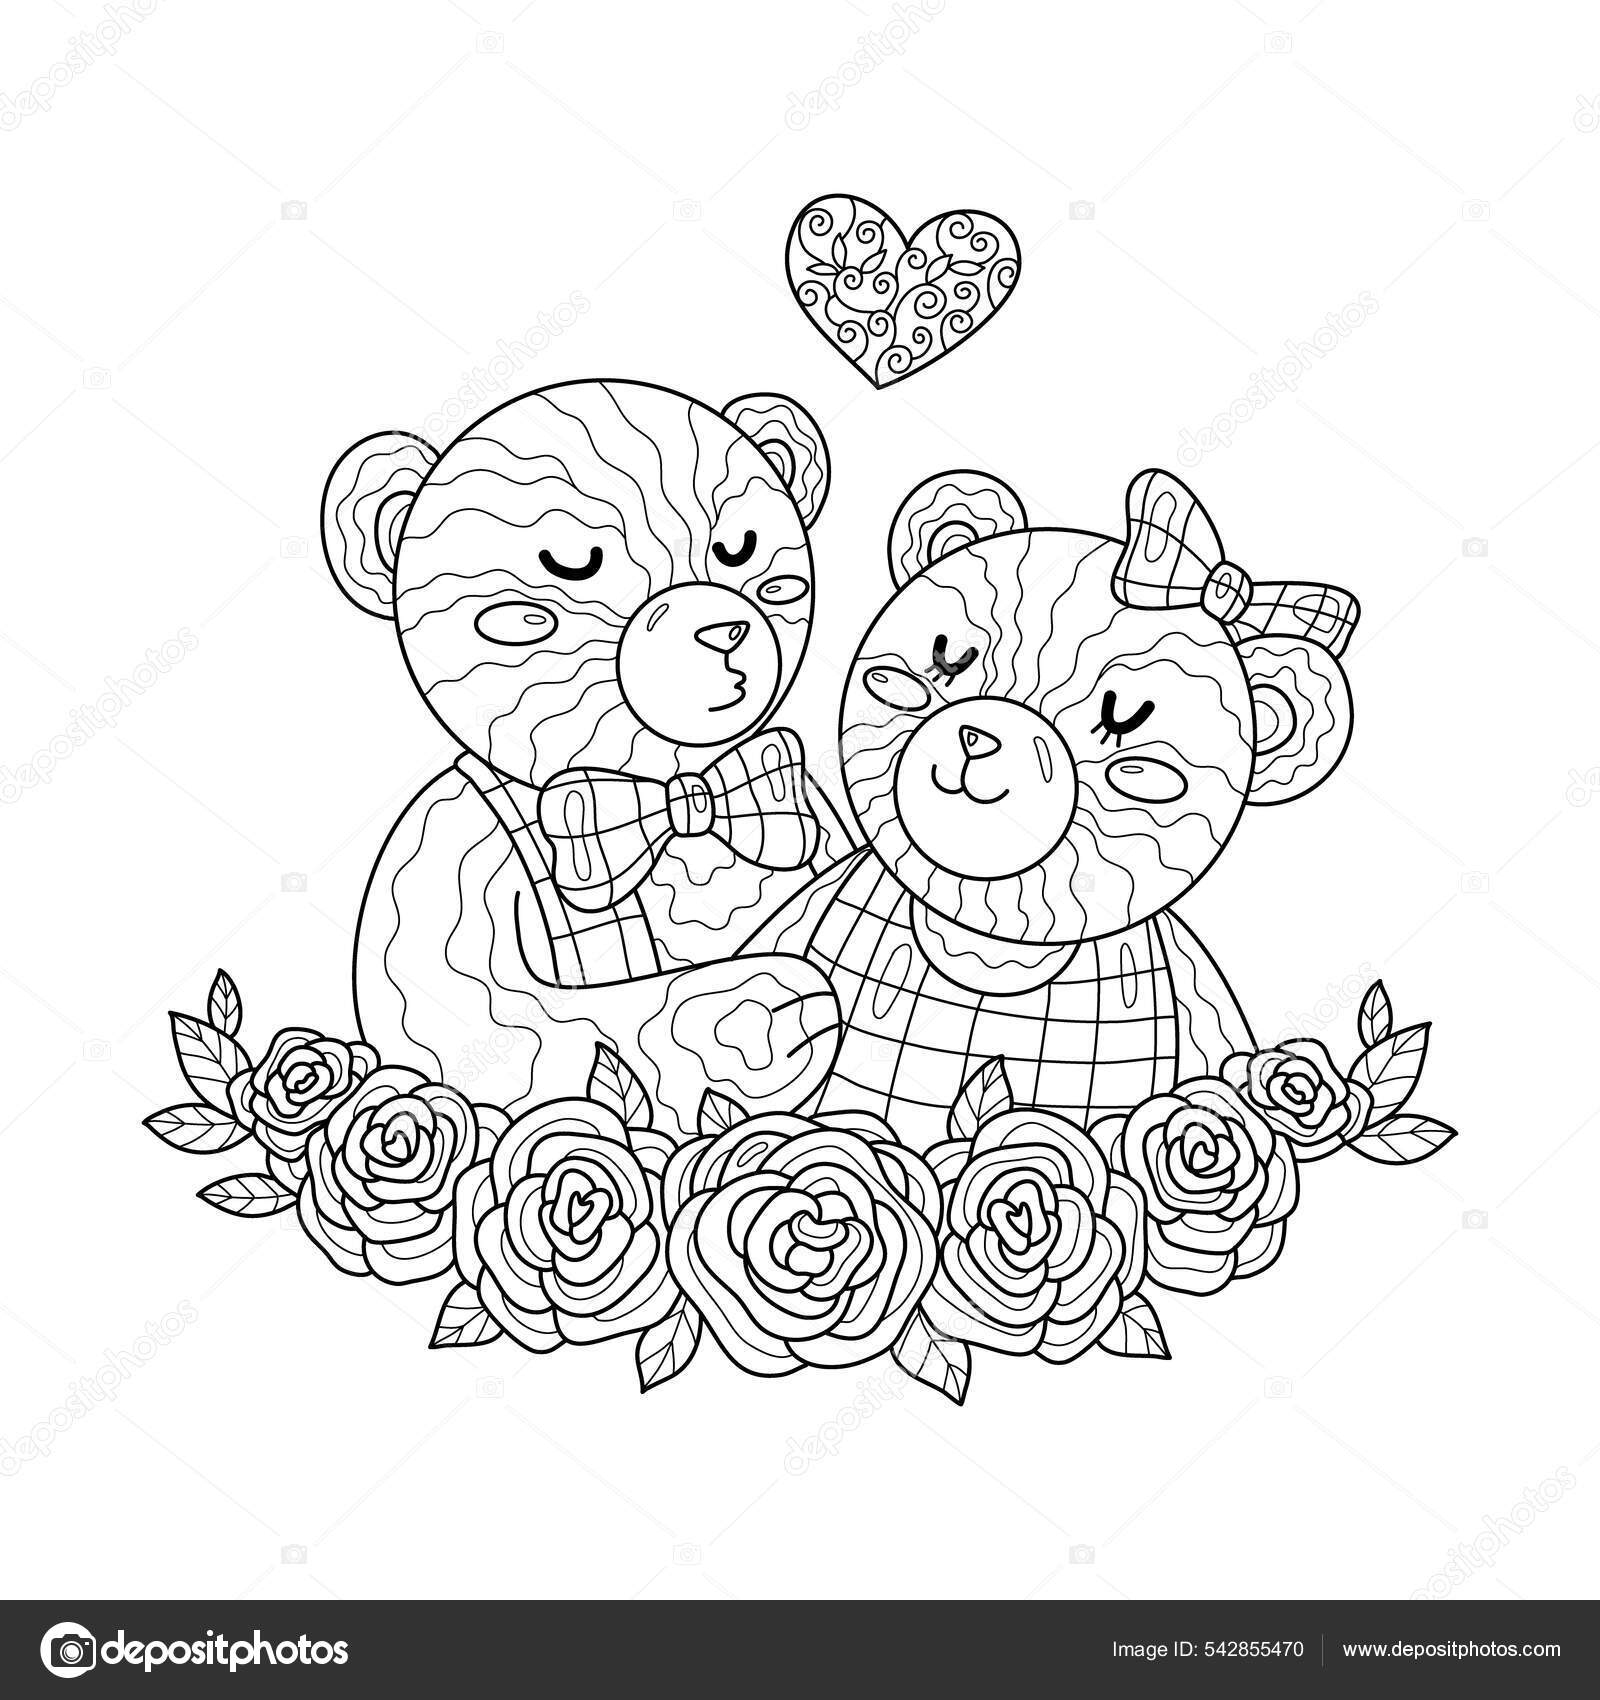 Sweet kiss teddy bear heart rose couple together celebrate valentine stock vector by daniellabelaya